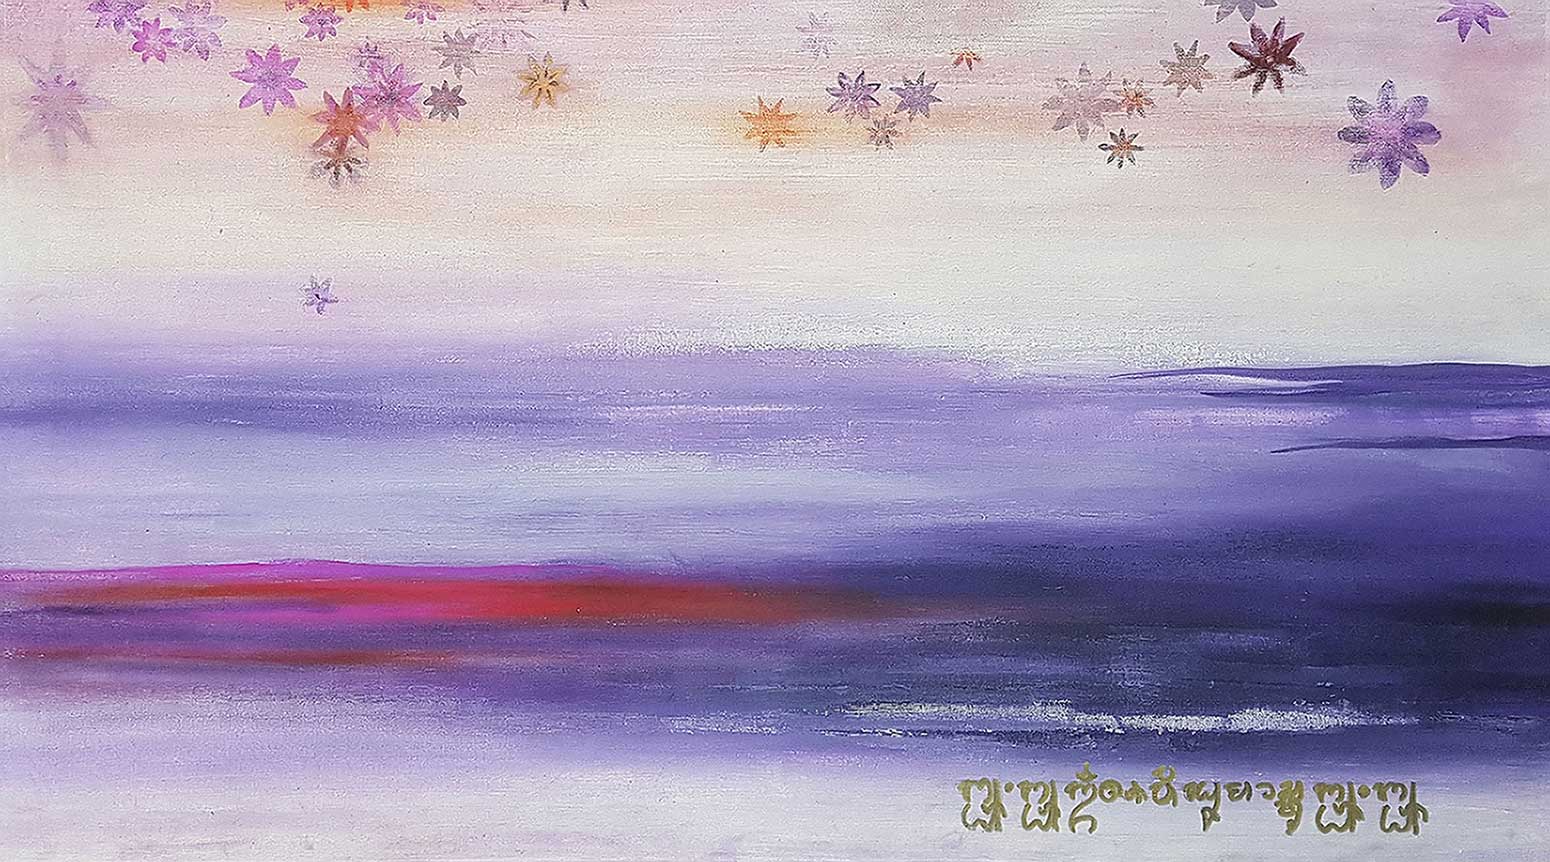 Acrylic painting: The warmth of compassion by Sabine Engert